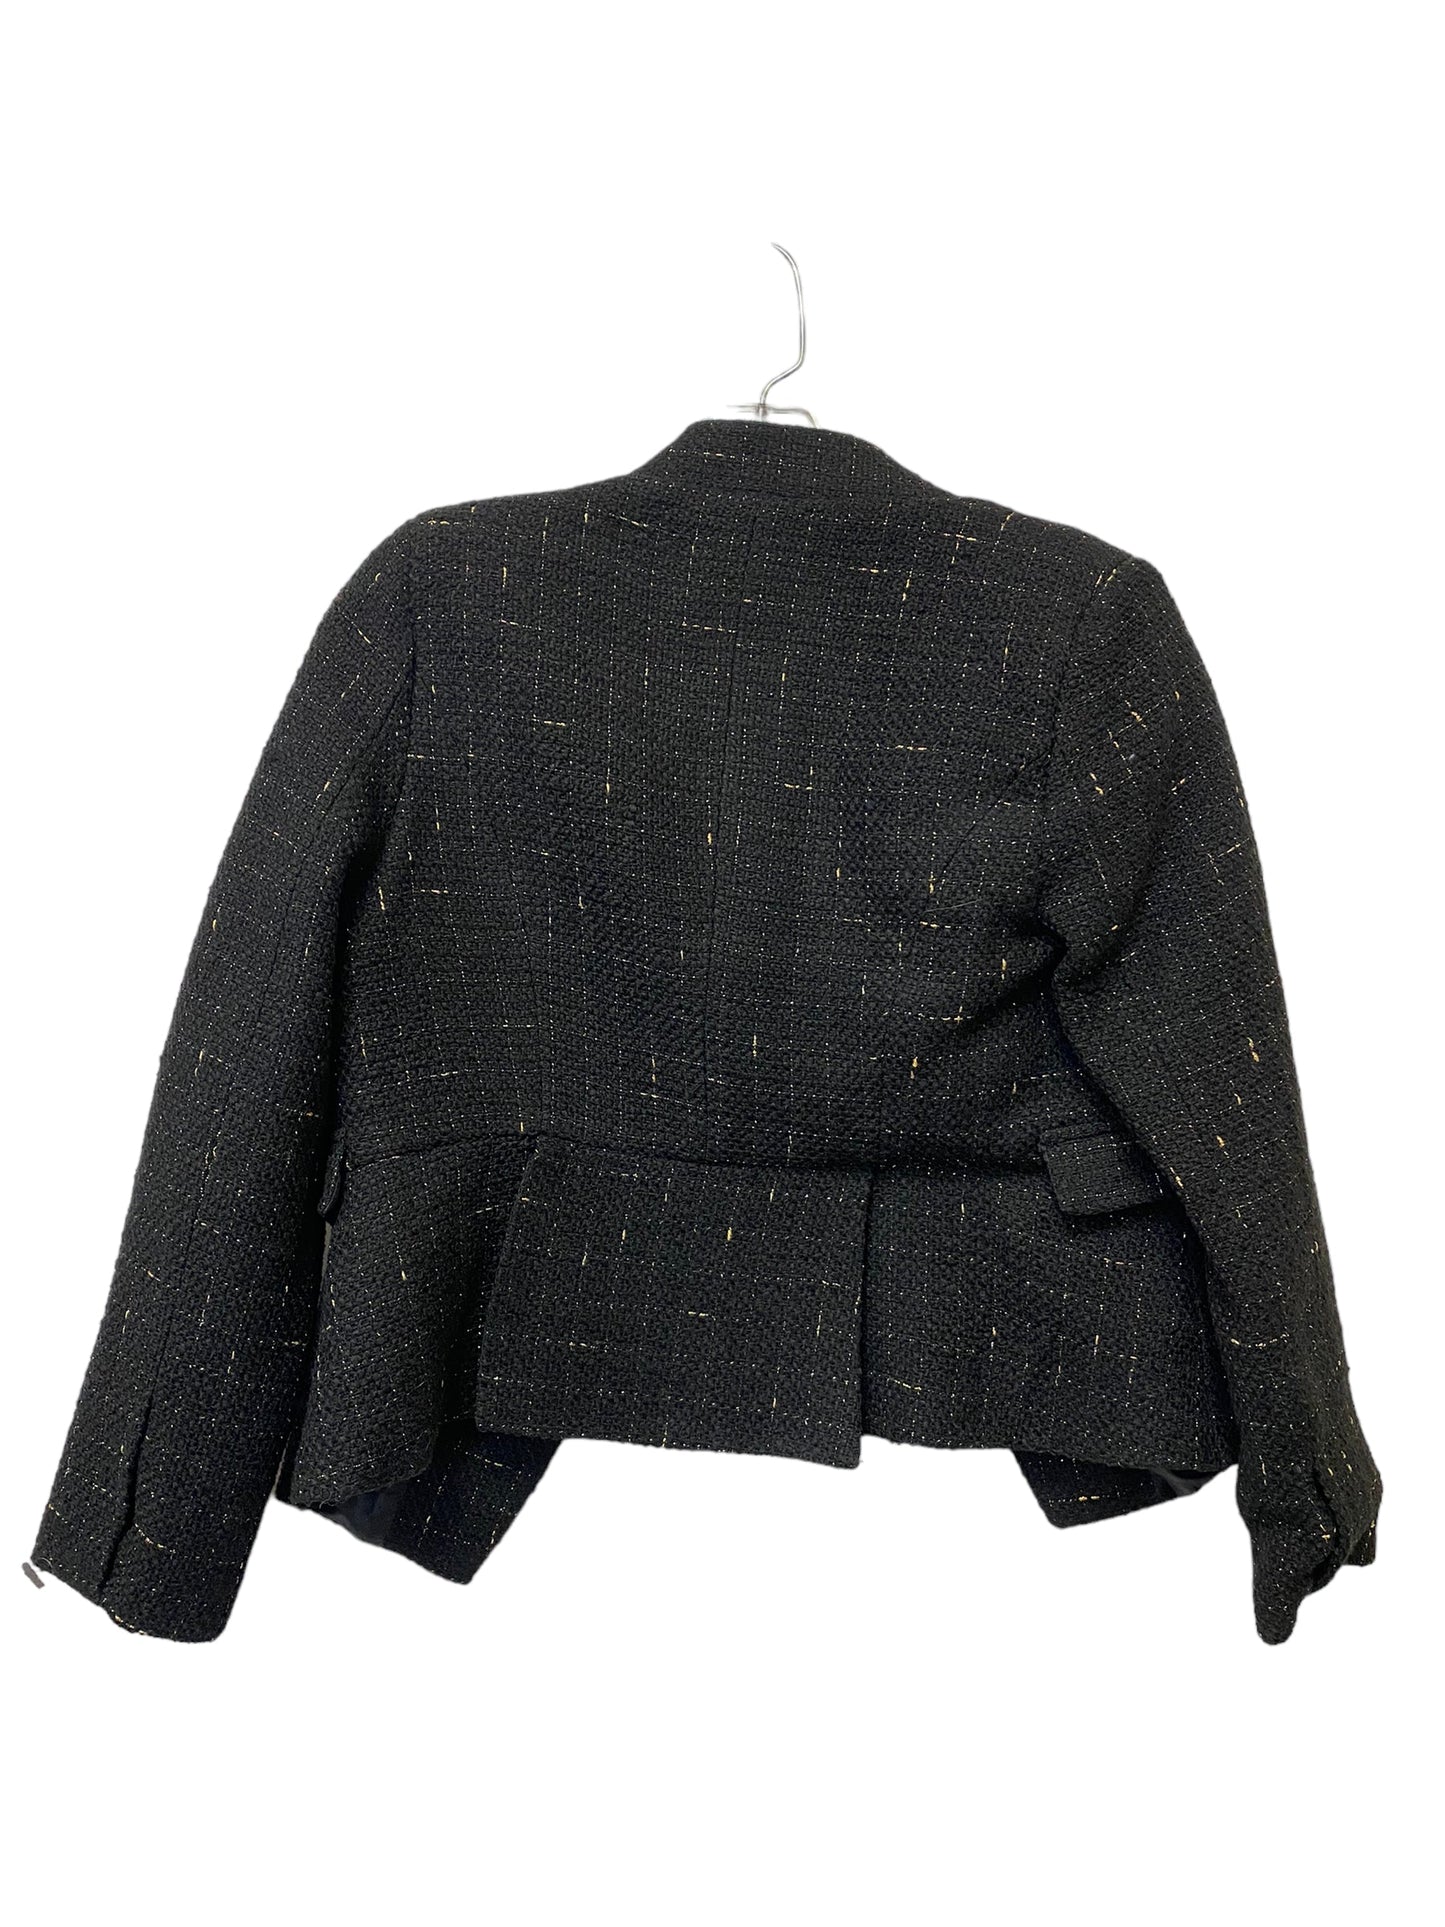 Blazer By Clothes Mentor  Size: Xs